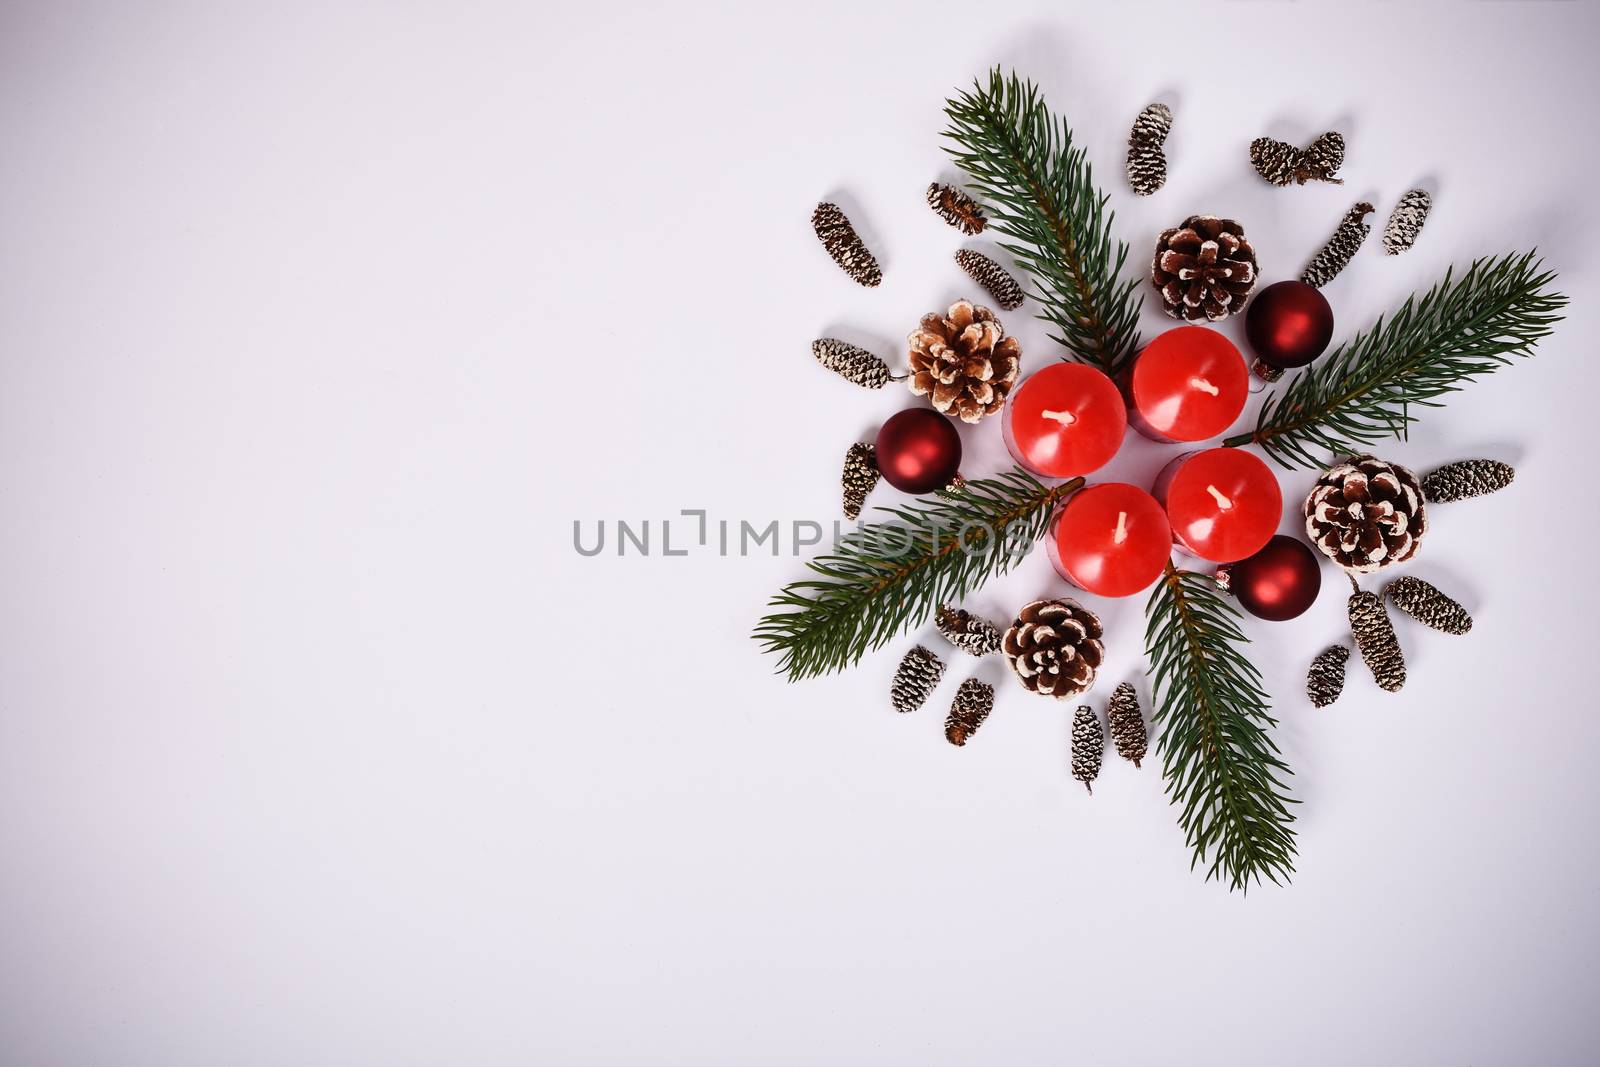 Seasonal greeting card concept with candles and pinecones by Mendelex